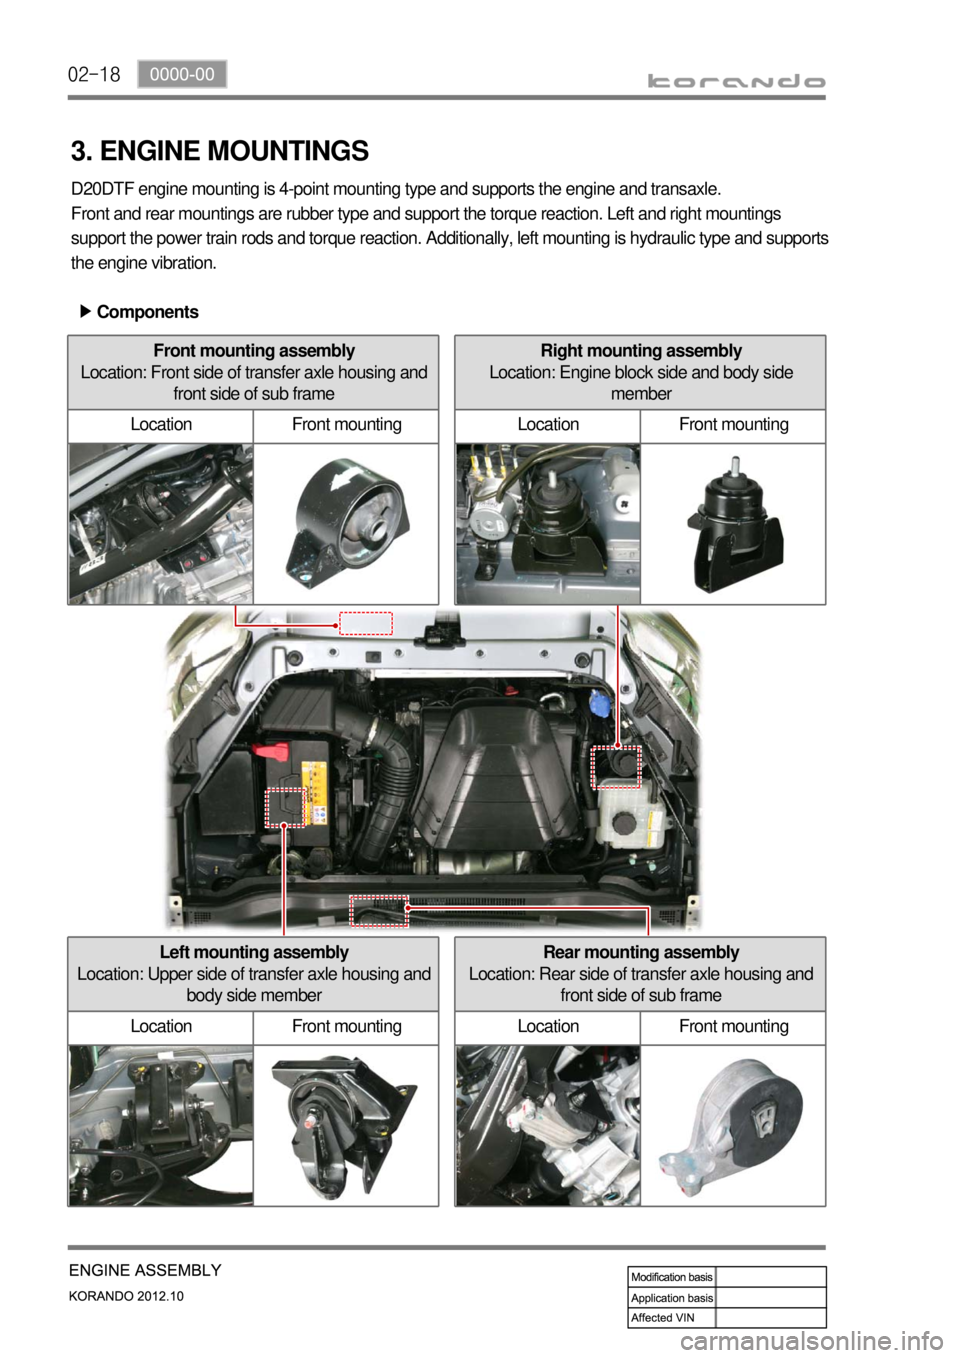 SSANGYONG KORANDO 2012  Service Manual 02-18
Right mounting assembly
Location: Engine block side and body side 
member
Location Front mountingFront mounting assembly
Location: Front side of transfer axle housing and 
front side of sub fram